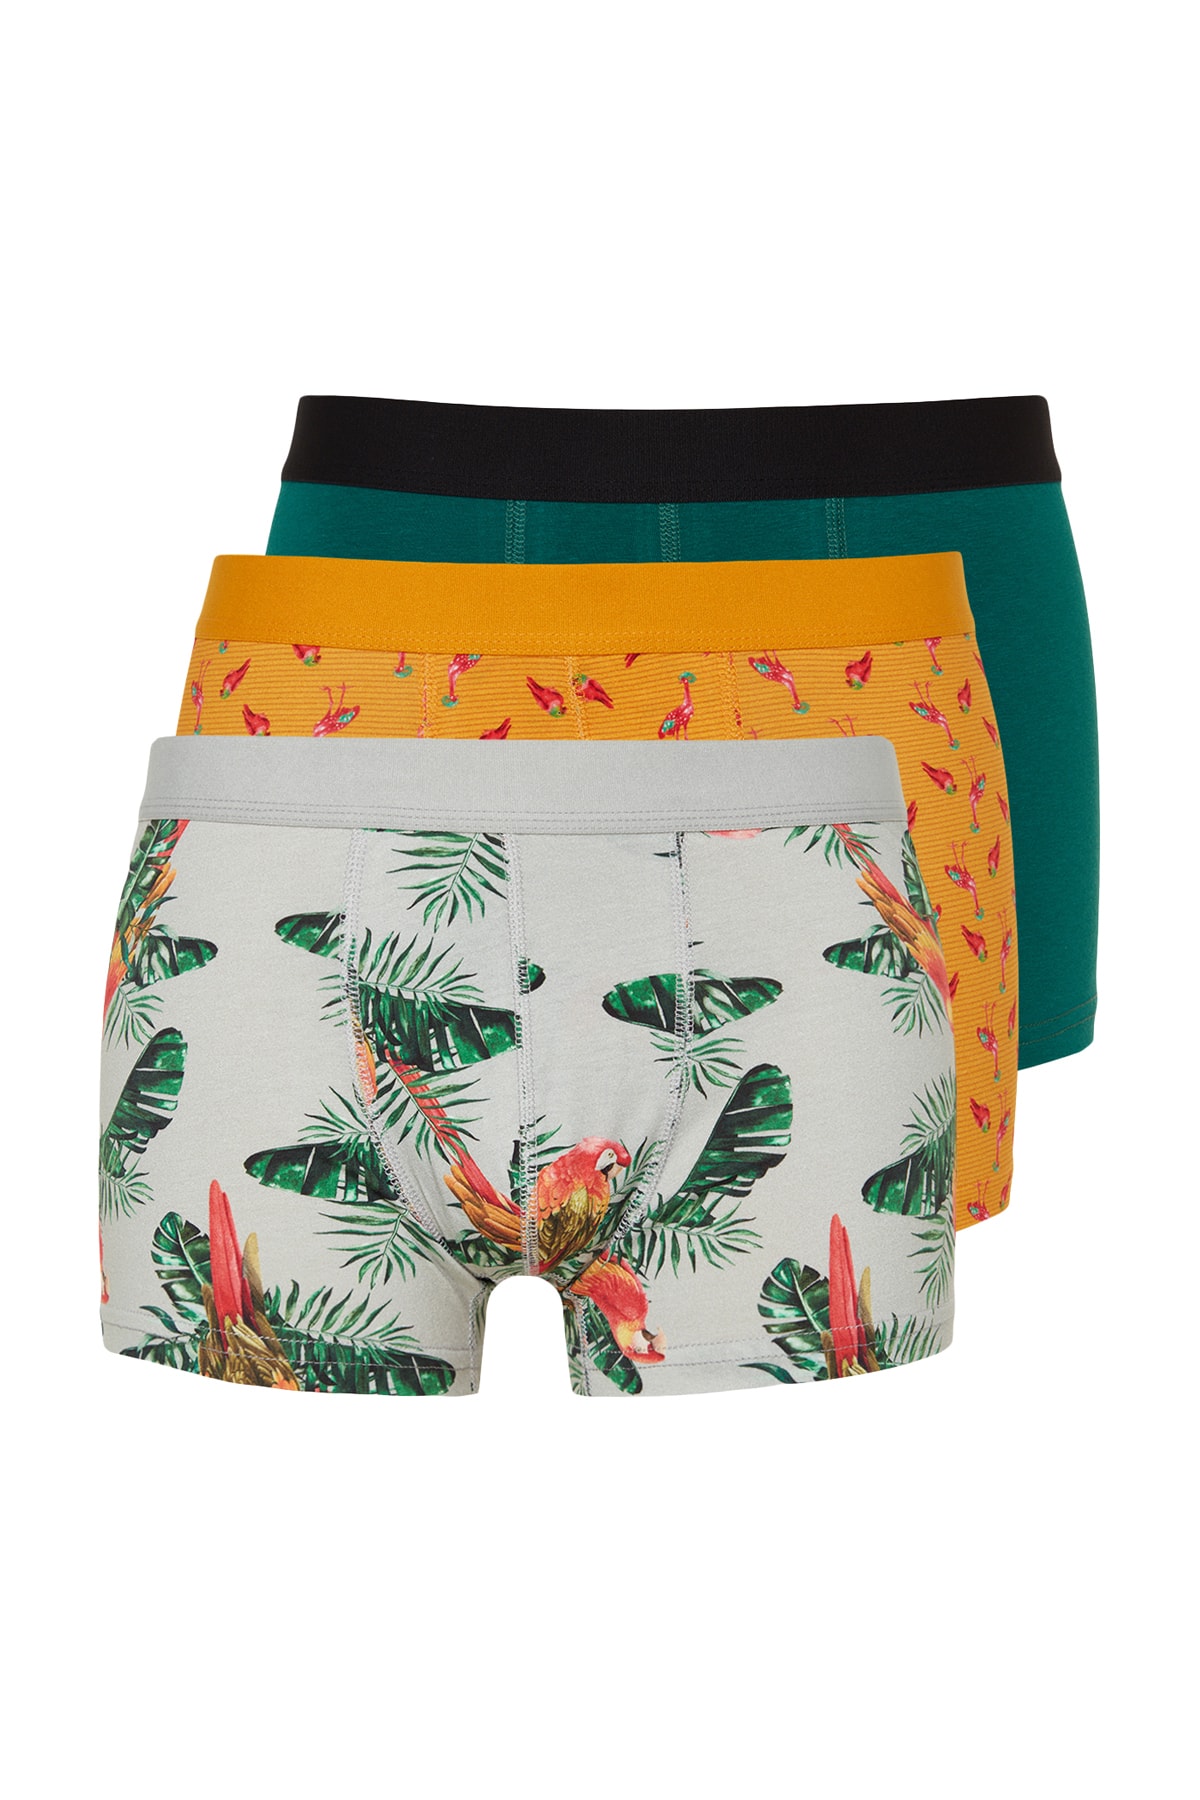 Trendyol Multicolored 3-Piece Tropical Patterned-Flat Pack Cotton Boxers